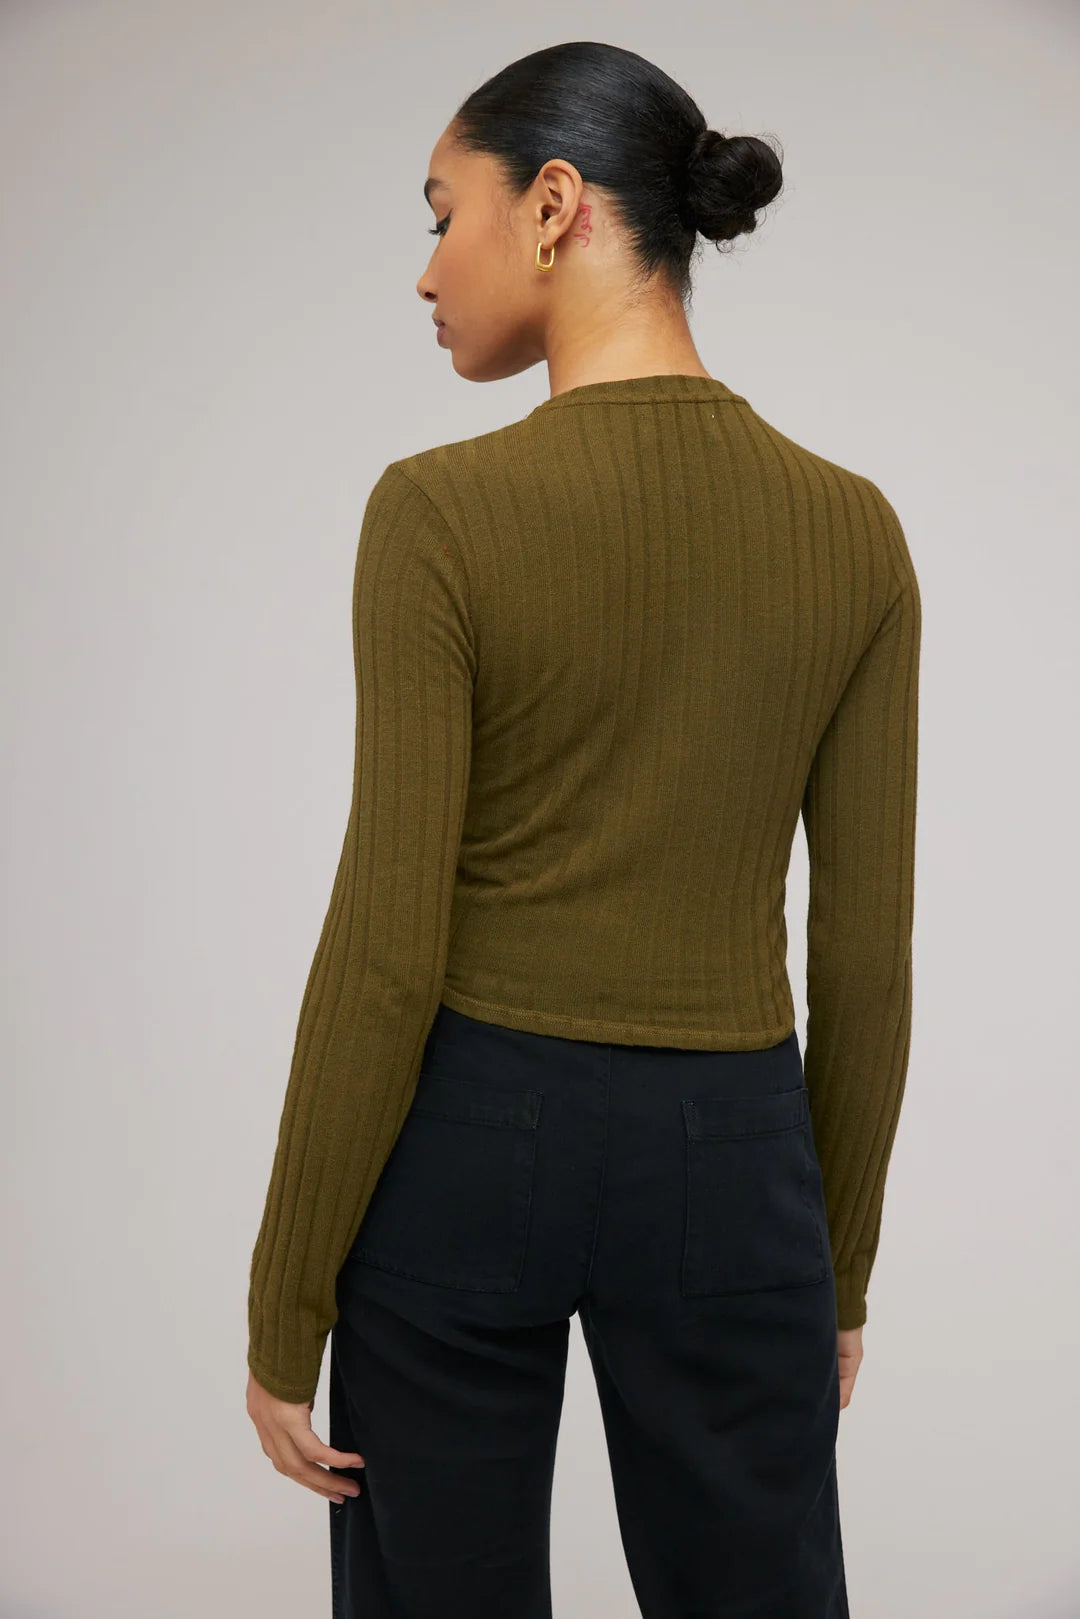 Cropped Crew Neck in Deep Rosemary